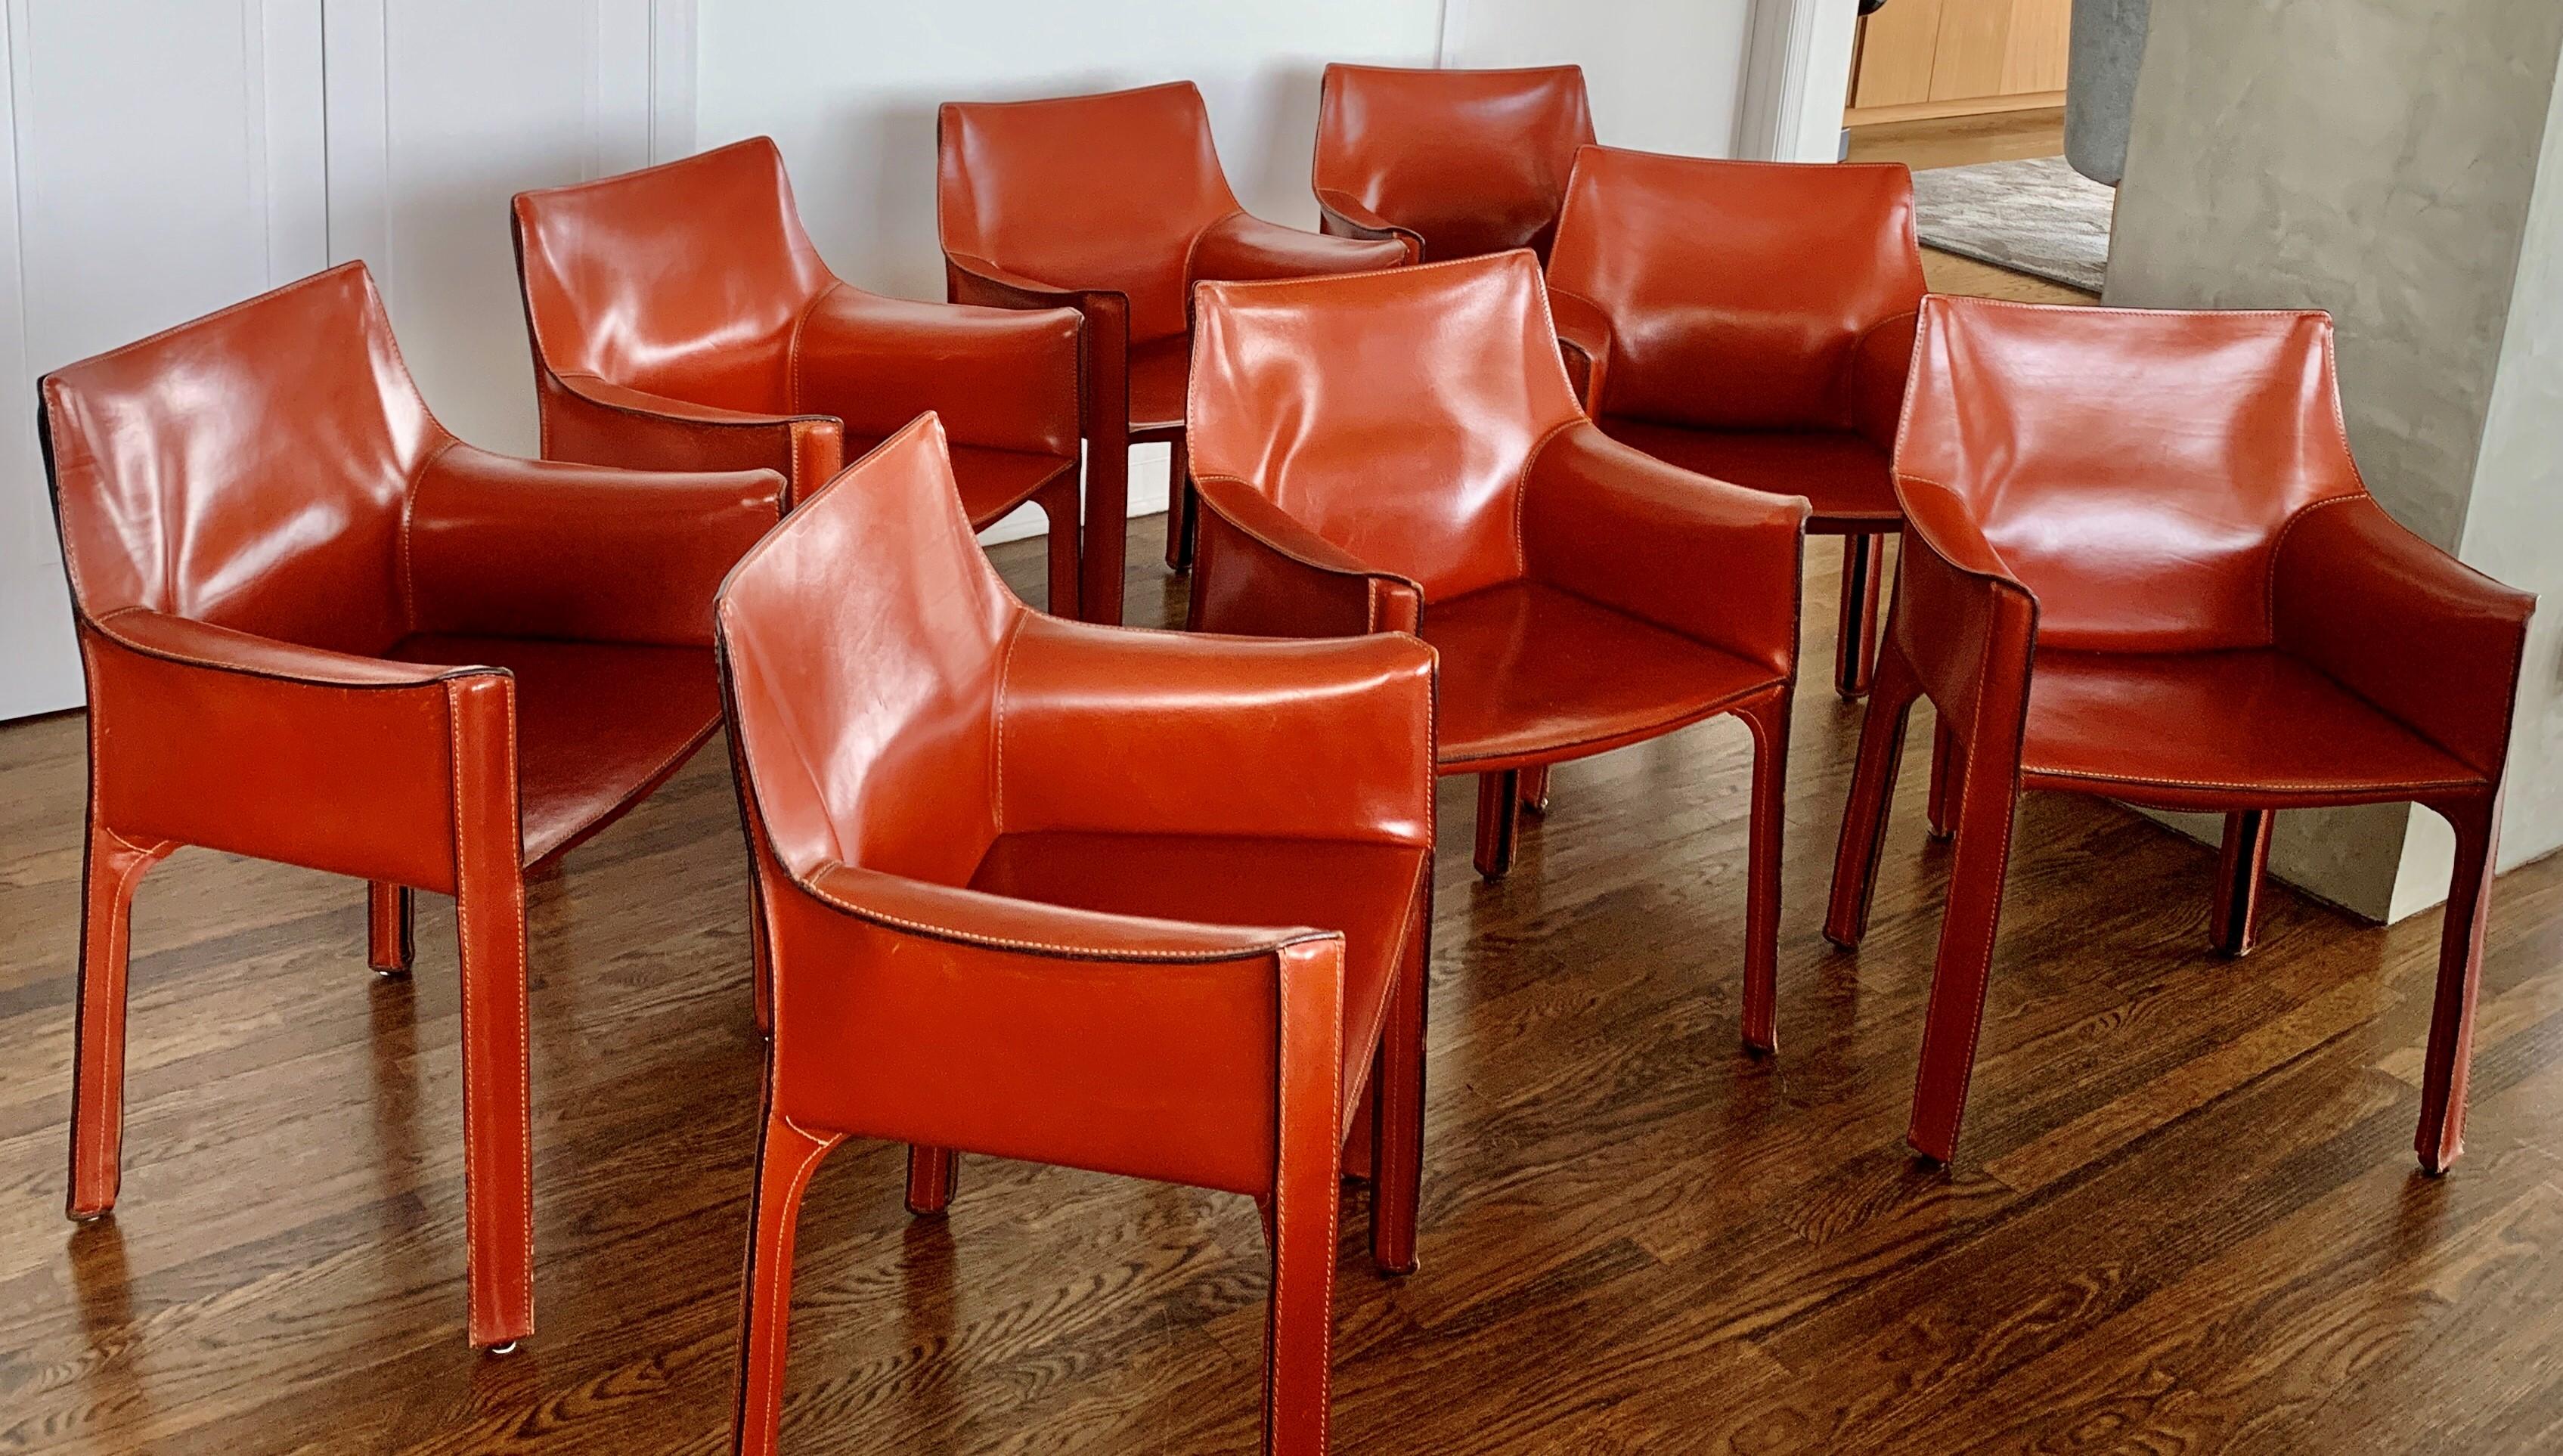 Photos TBU!

Set of 8 Mario Bellini CAB 413 chairs, made by Cassina in the 1990s. Flexible steel frame covered with a skin of high quality Russian Red (also known as Bulgarian Red) saddle leather. This elegant, versatile chair is equally suitable